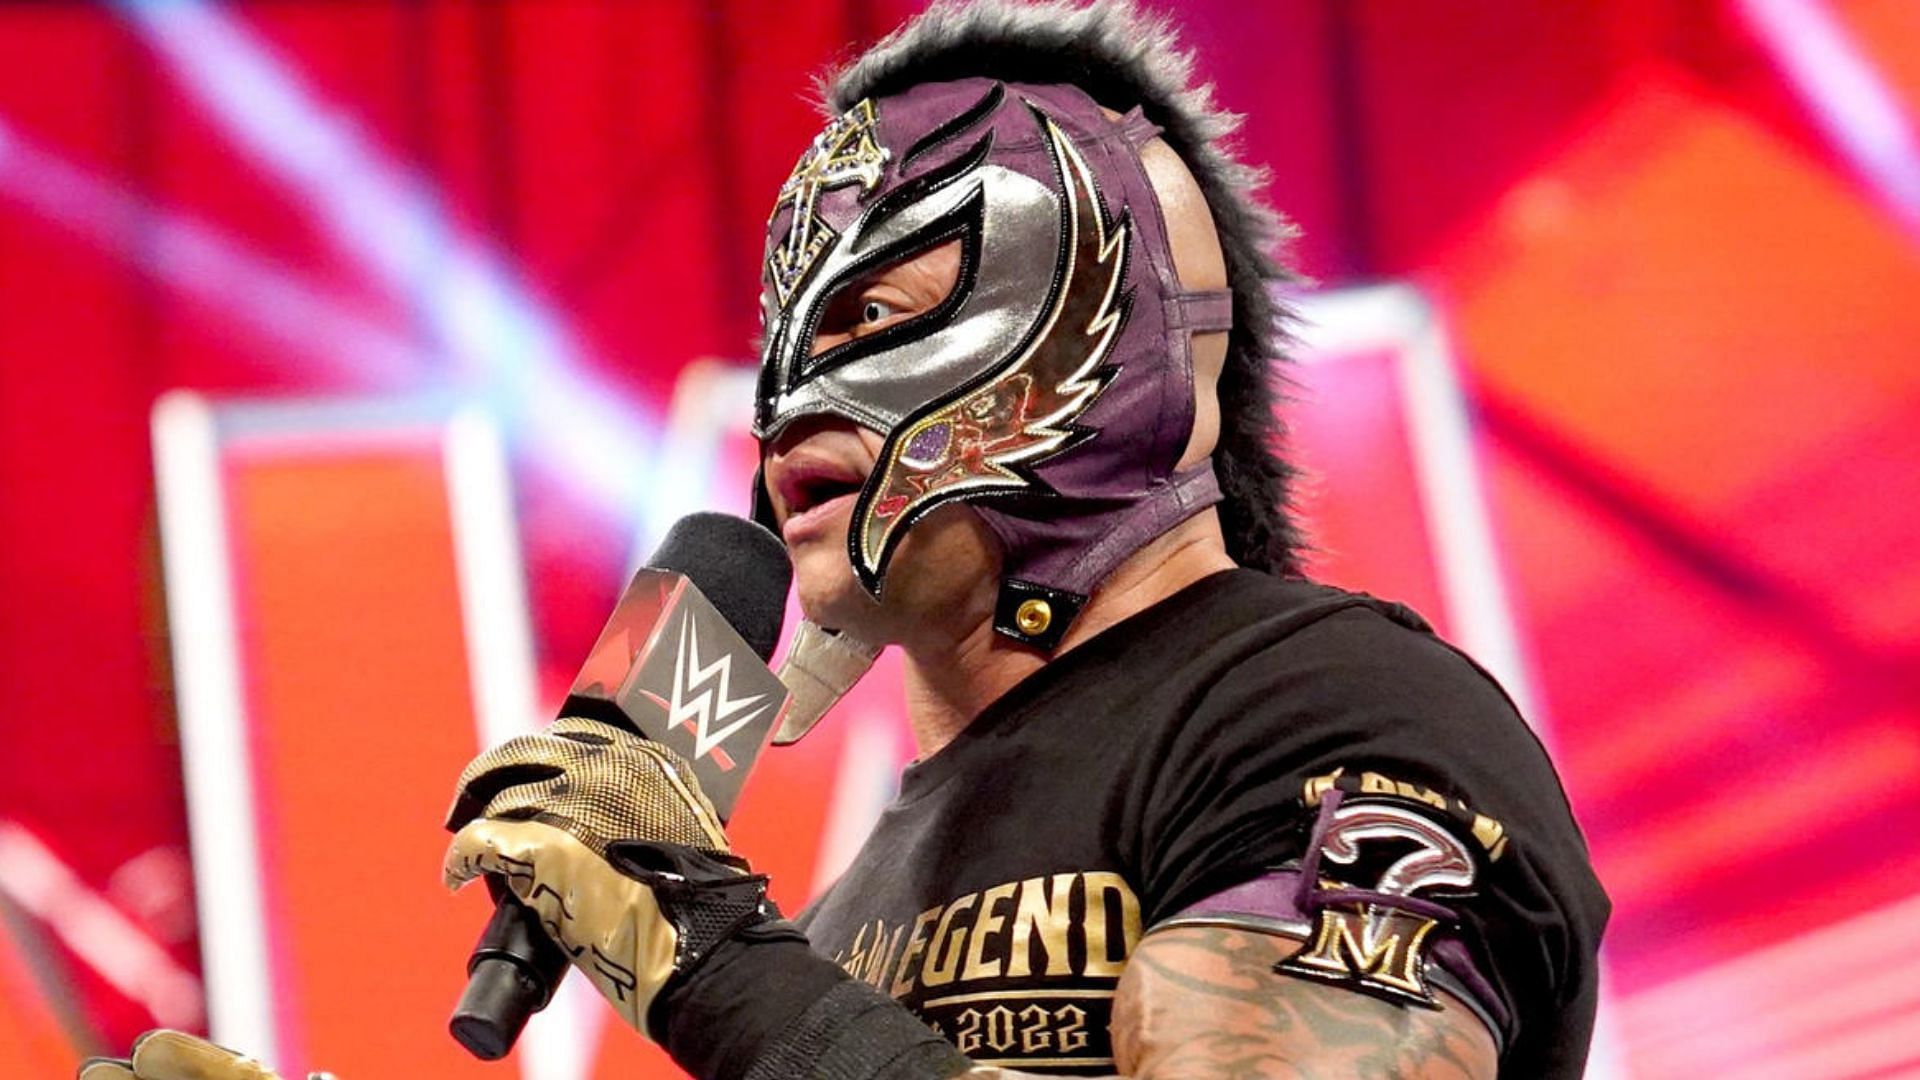 Rey Mysterio during a promo on WWE RAW